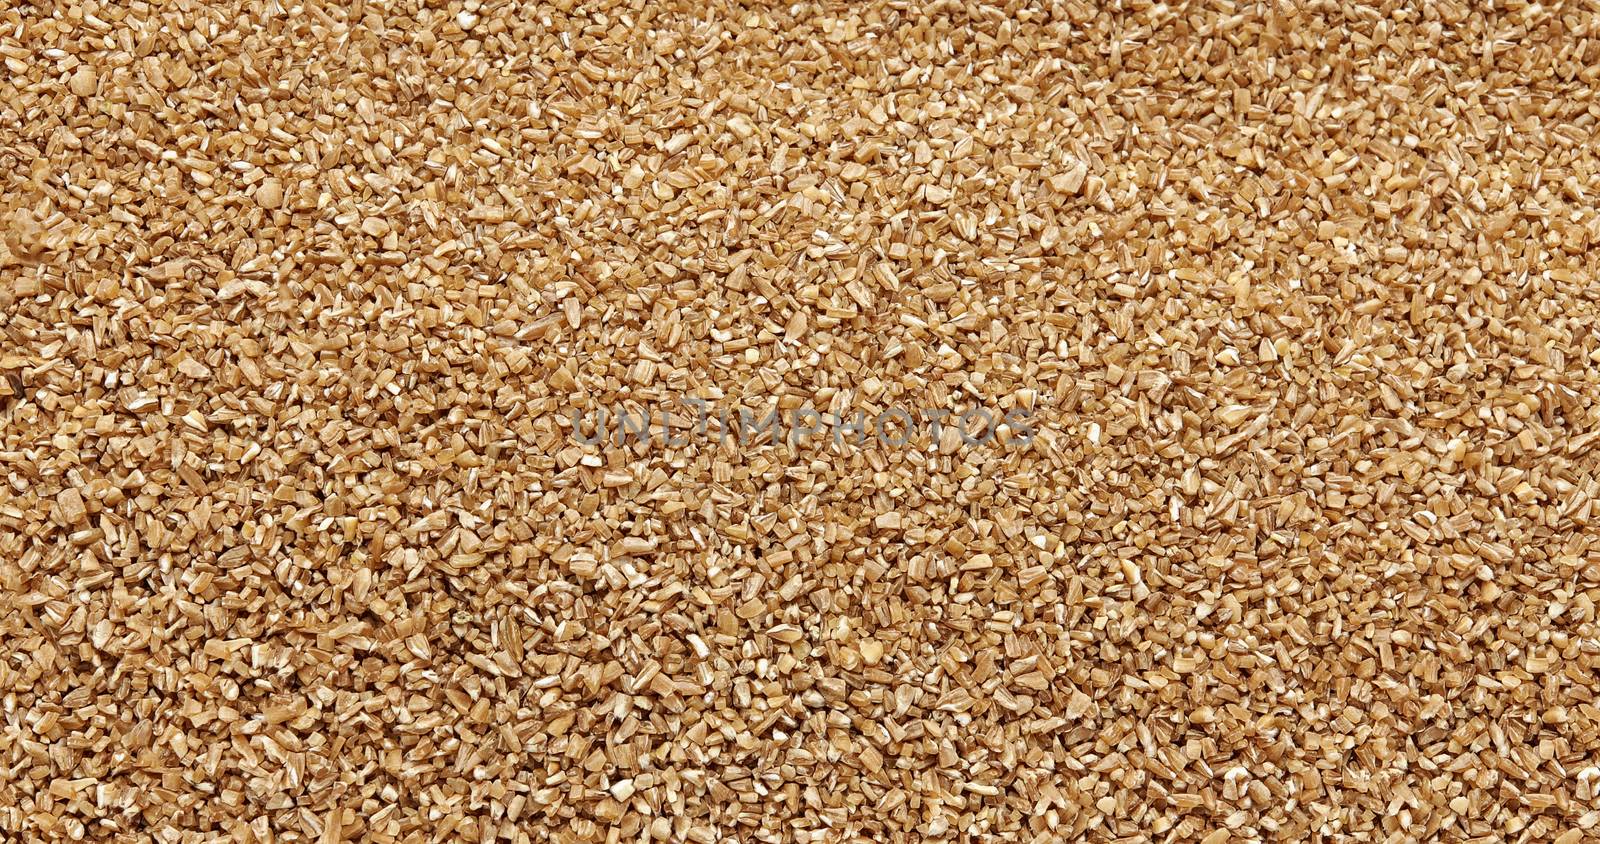 Crushed spelt groats - traditional food - texture and detail, close up